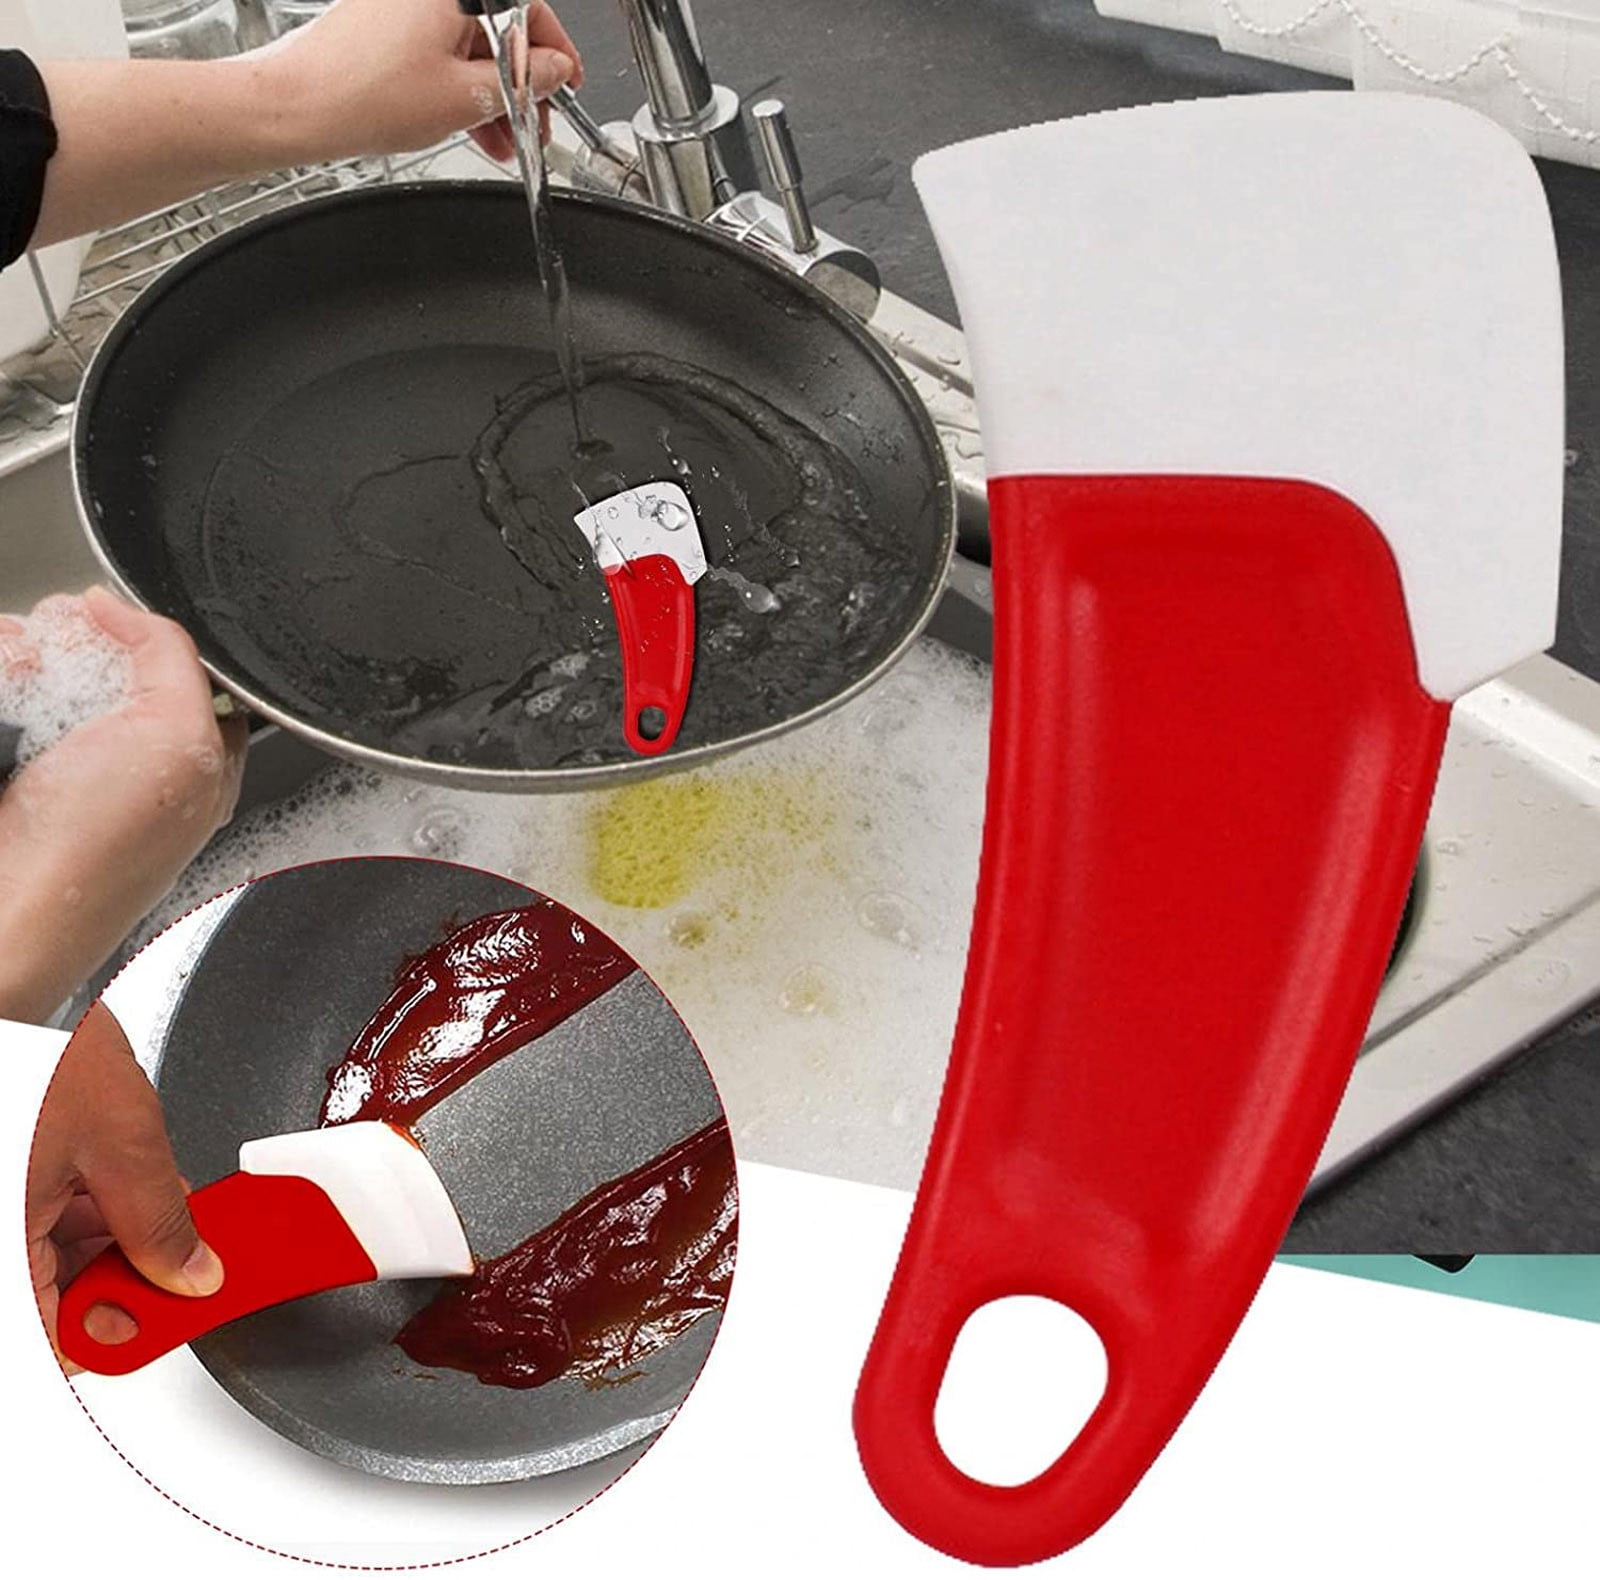 AIEOTT Household Pots Pans Dishes Grease Heat Resistant Cleaning Flexible  Thicker Scraper Clean Spatula Plastic Pan Scraper Tools For Iron Skillets